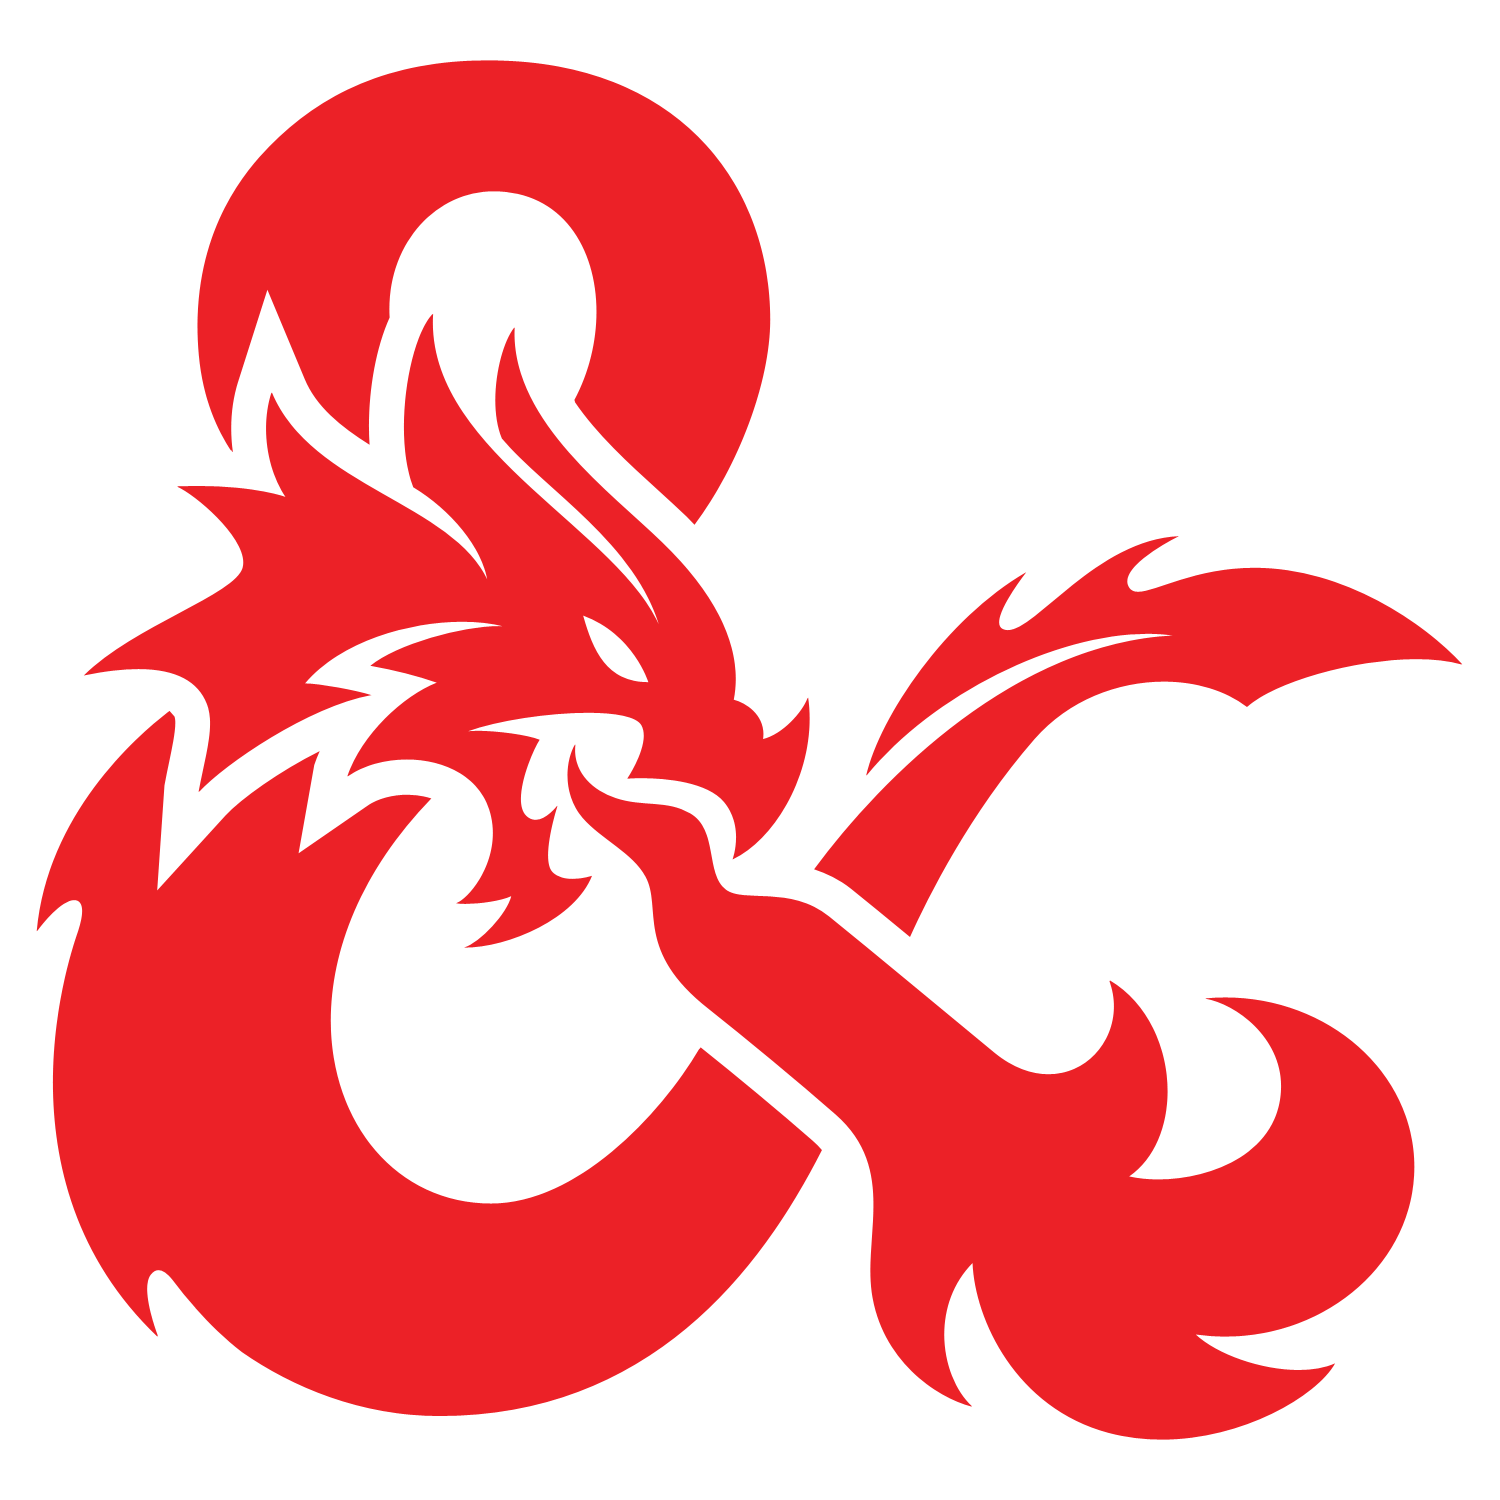 The Dungeons and Dragons Ampersand logo